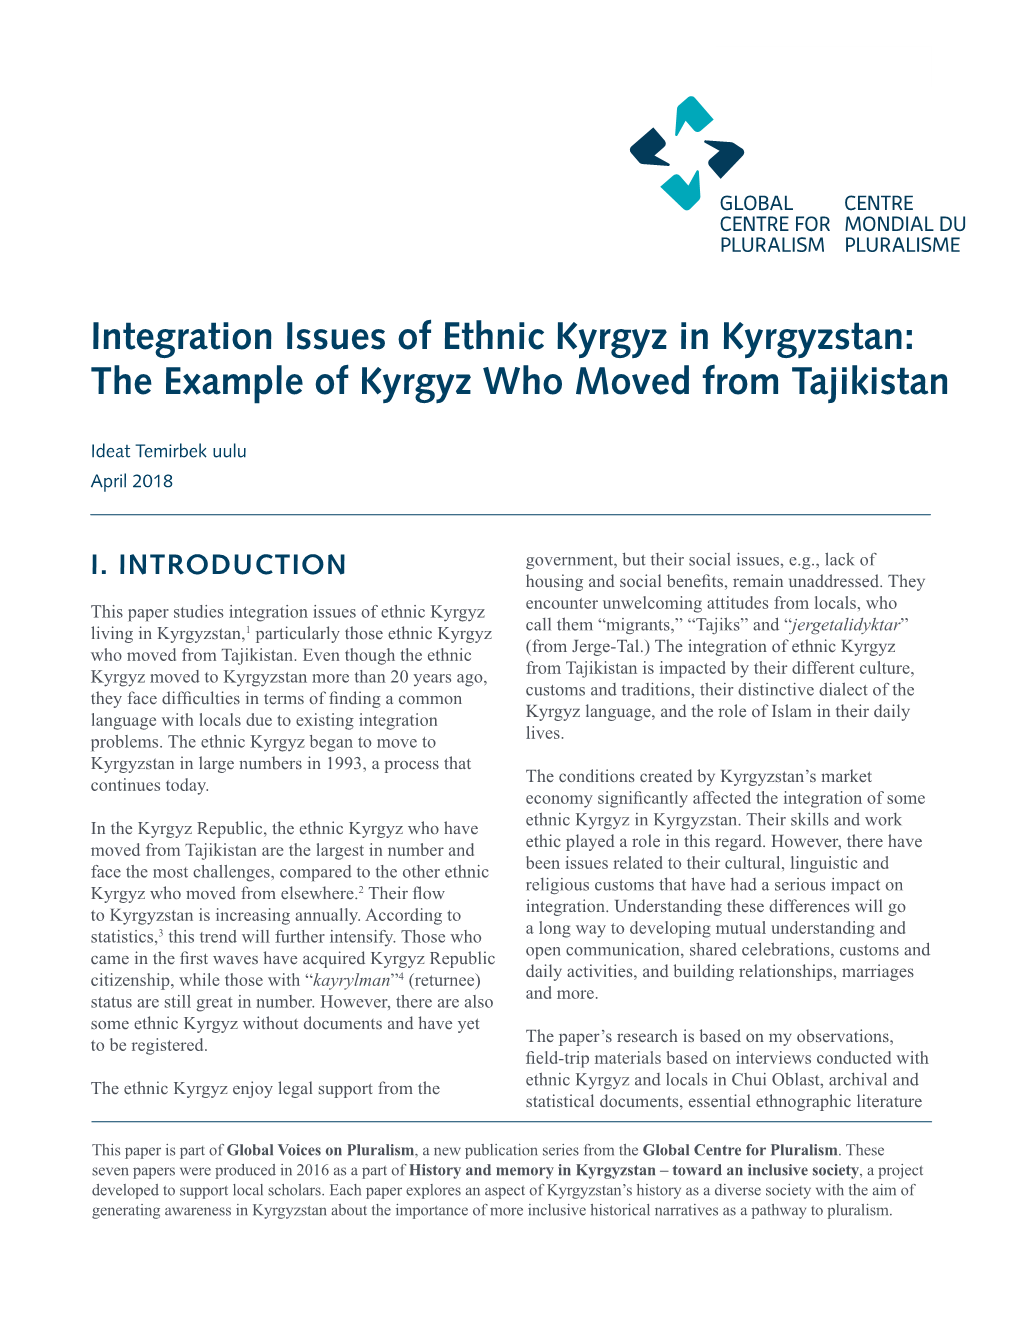 Integration Issues of Ethnic Kyrgyz in Kyrgyzstan: the Example of Kyrgyz Who Moved from Tajikistan